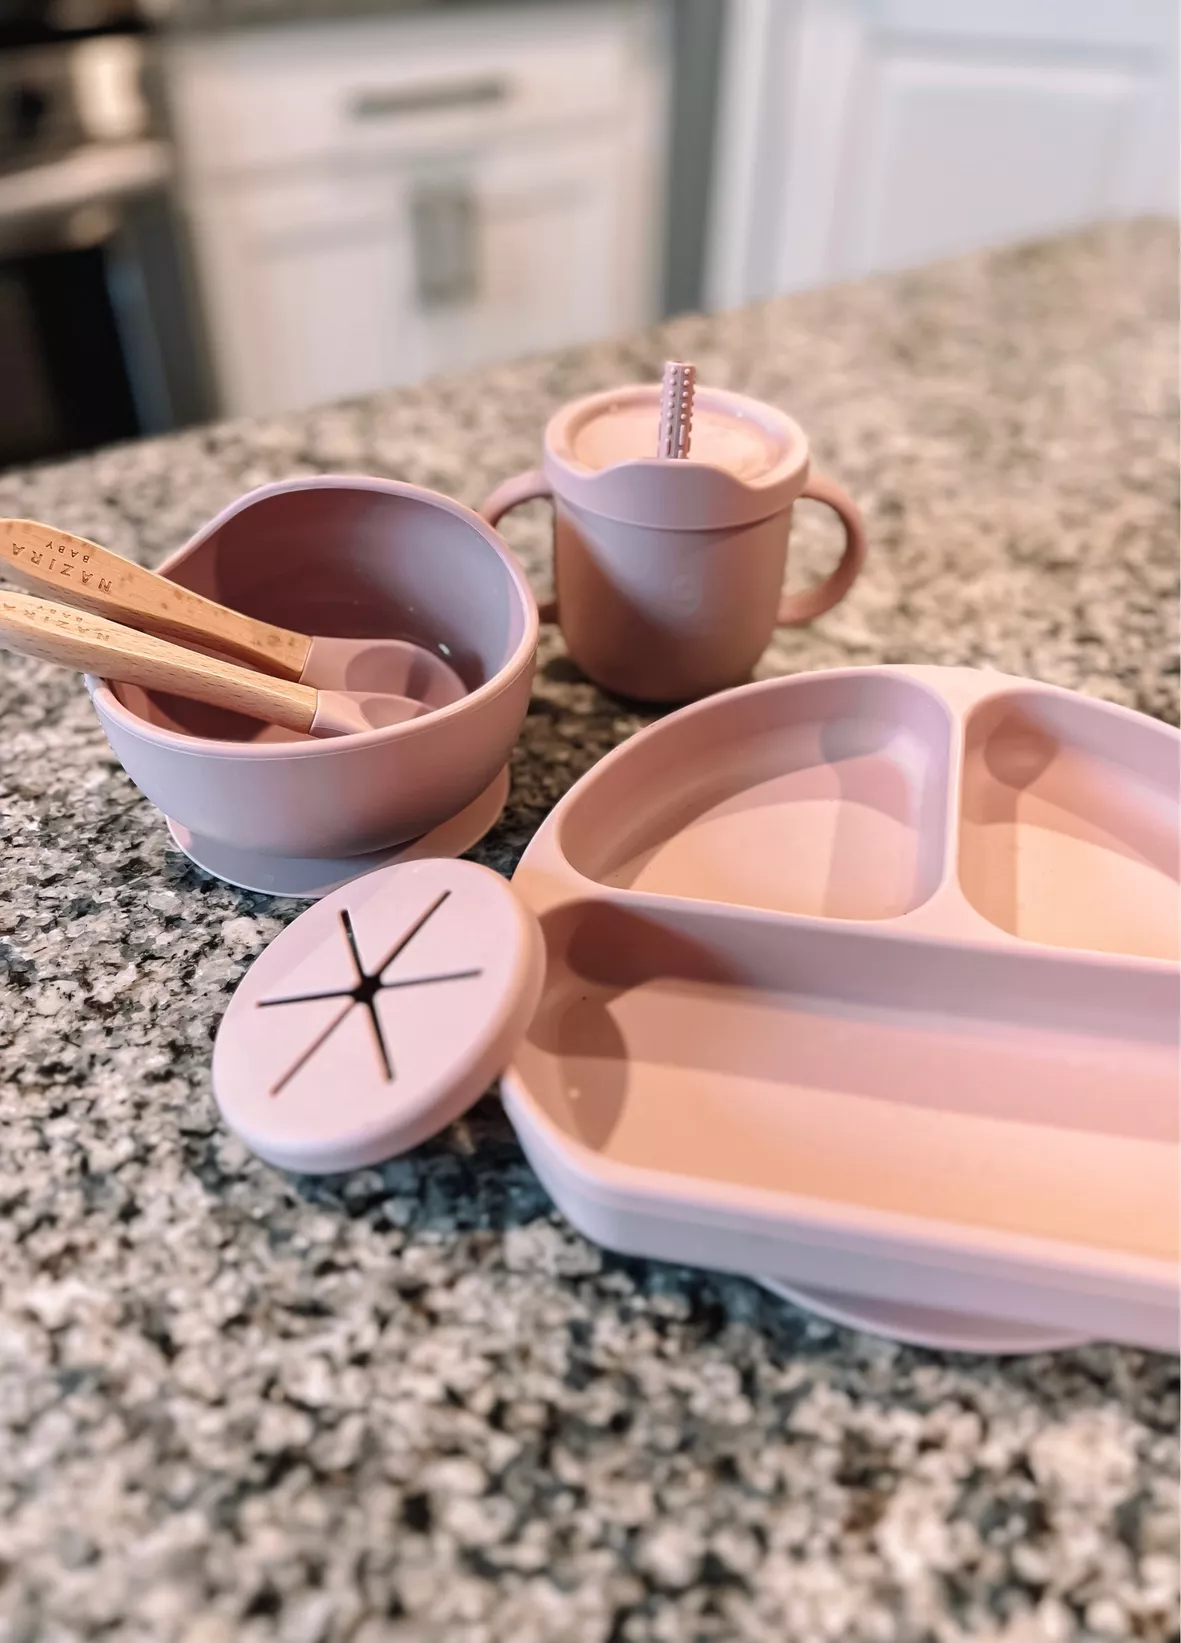  NAZIRABABY Silicone Baby Bowls and Spoons First Stage